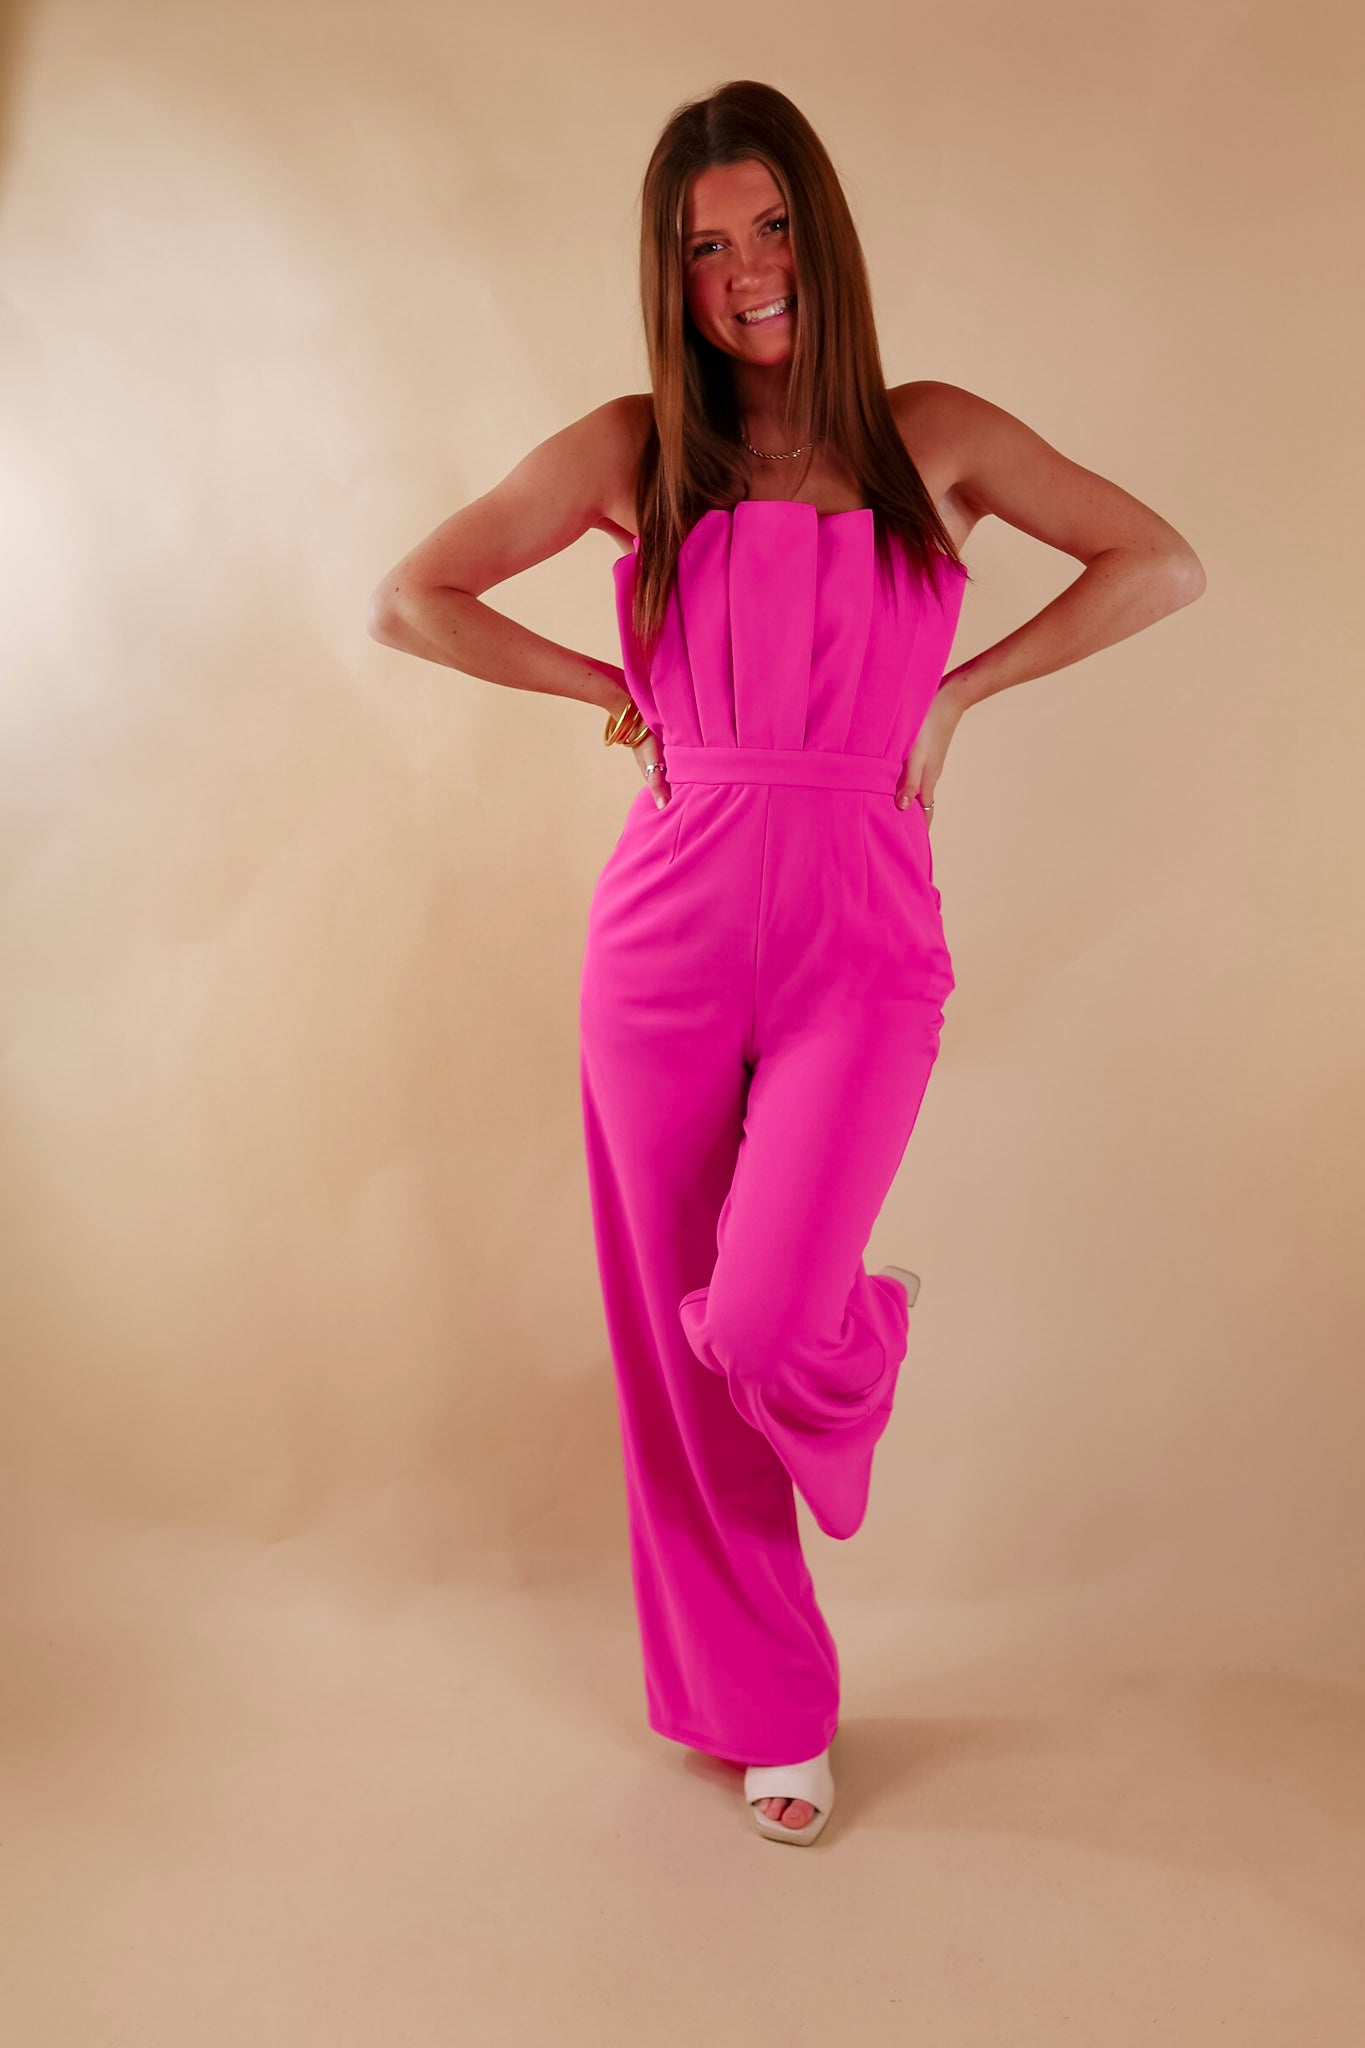 Do It With Pizazz Strapless Jumpsuit in Hot Pink - Giddy Up Glamour Boutique